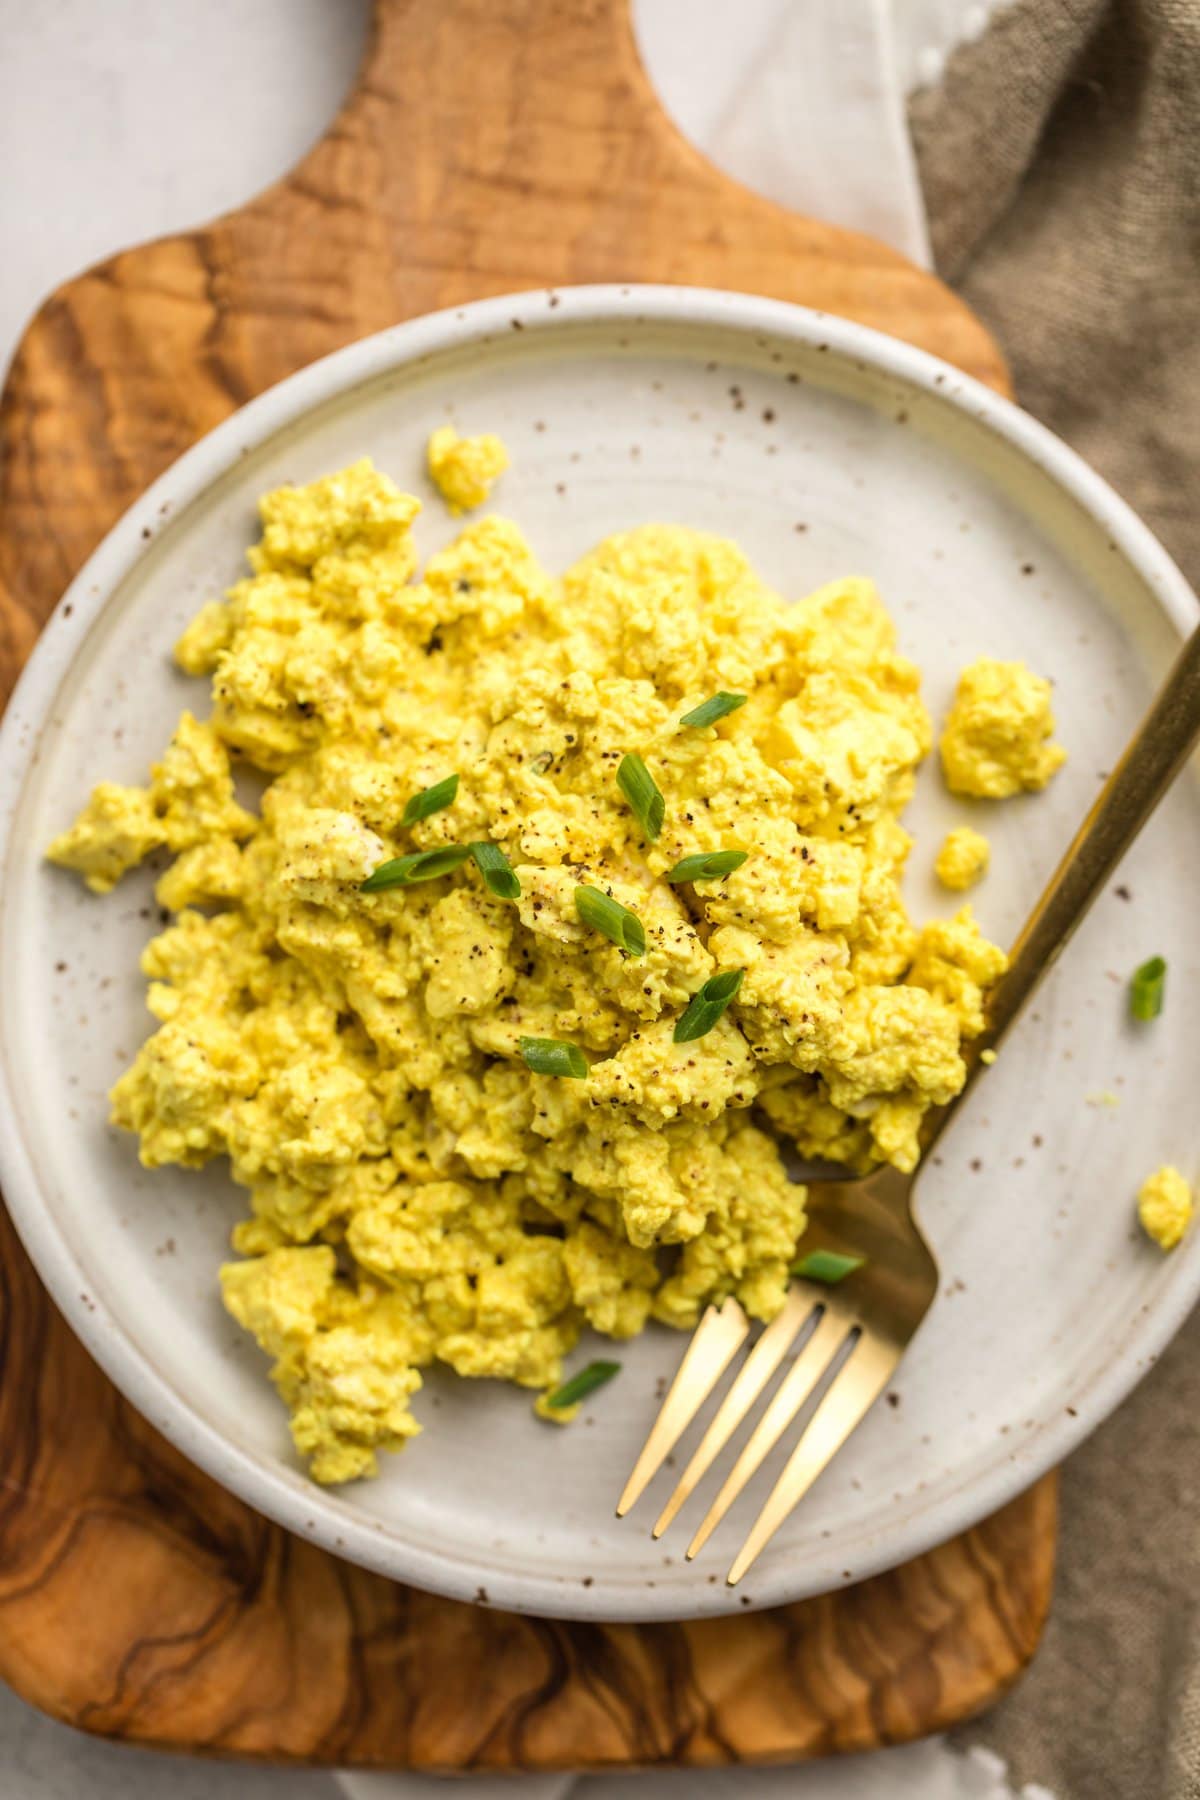 The Best Tofu Scramble Recipe Vegan Egg Substitute From My Bowl,Passion Flower Vine Red